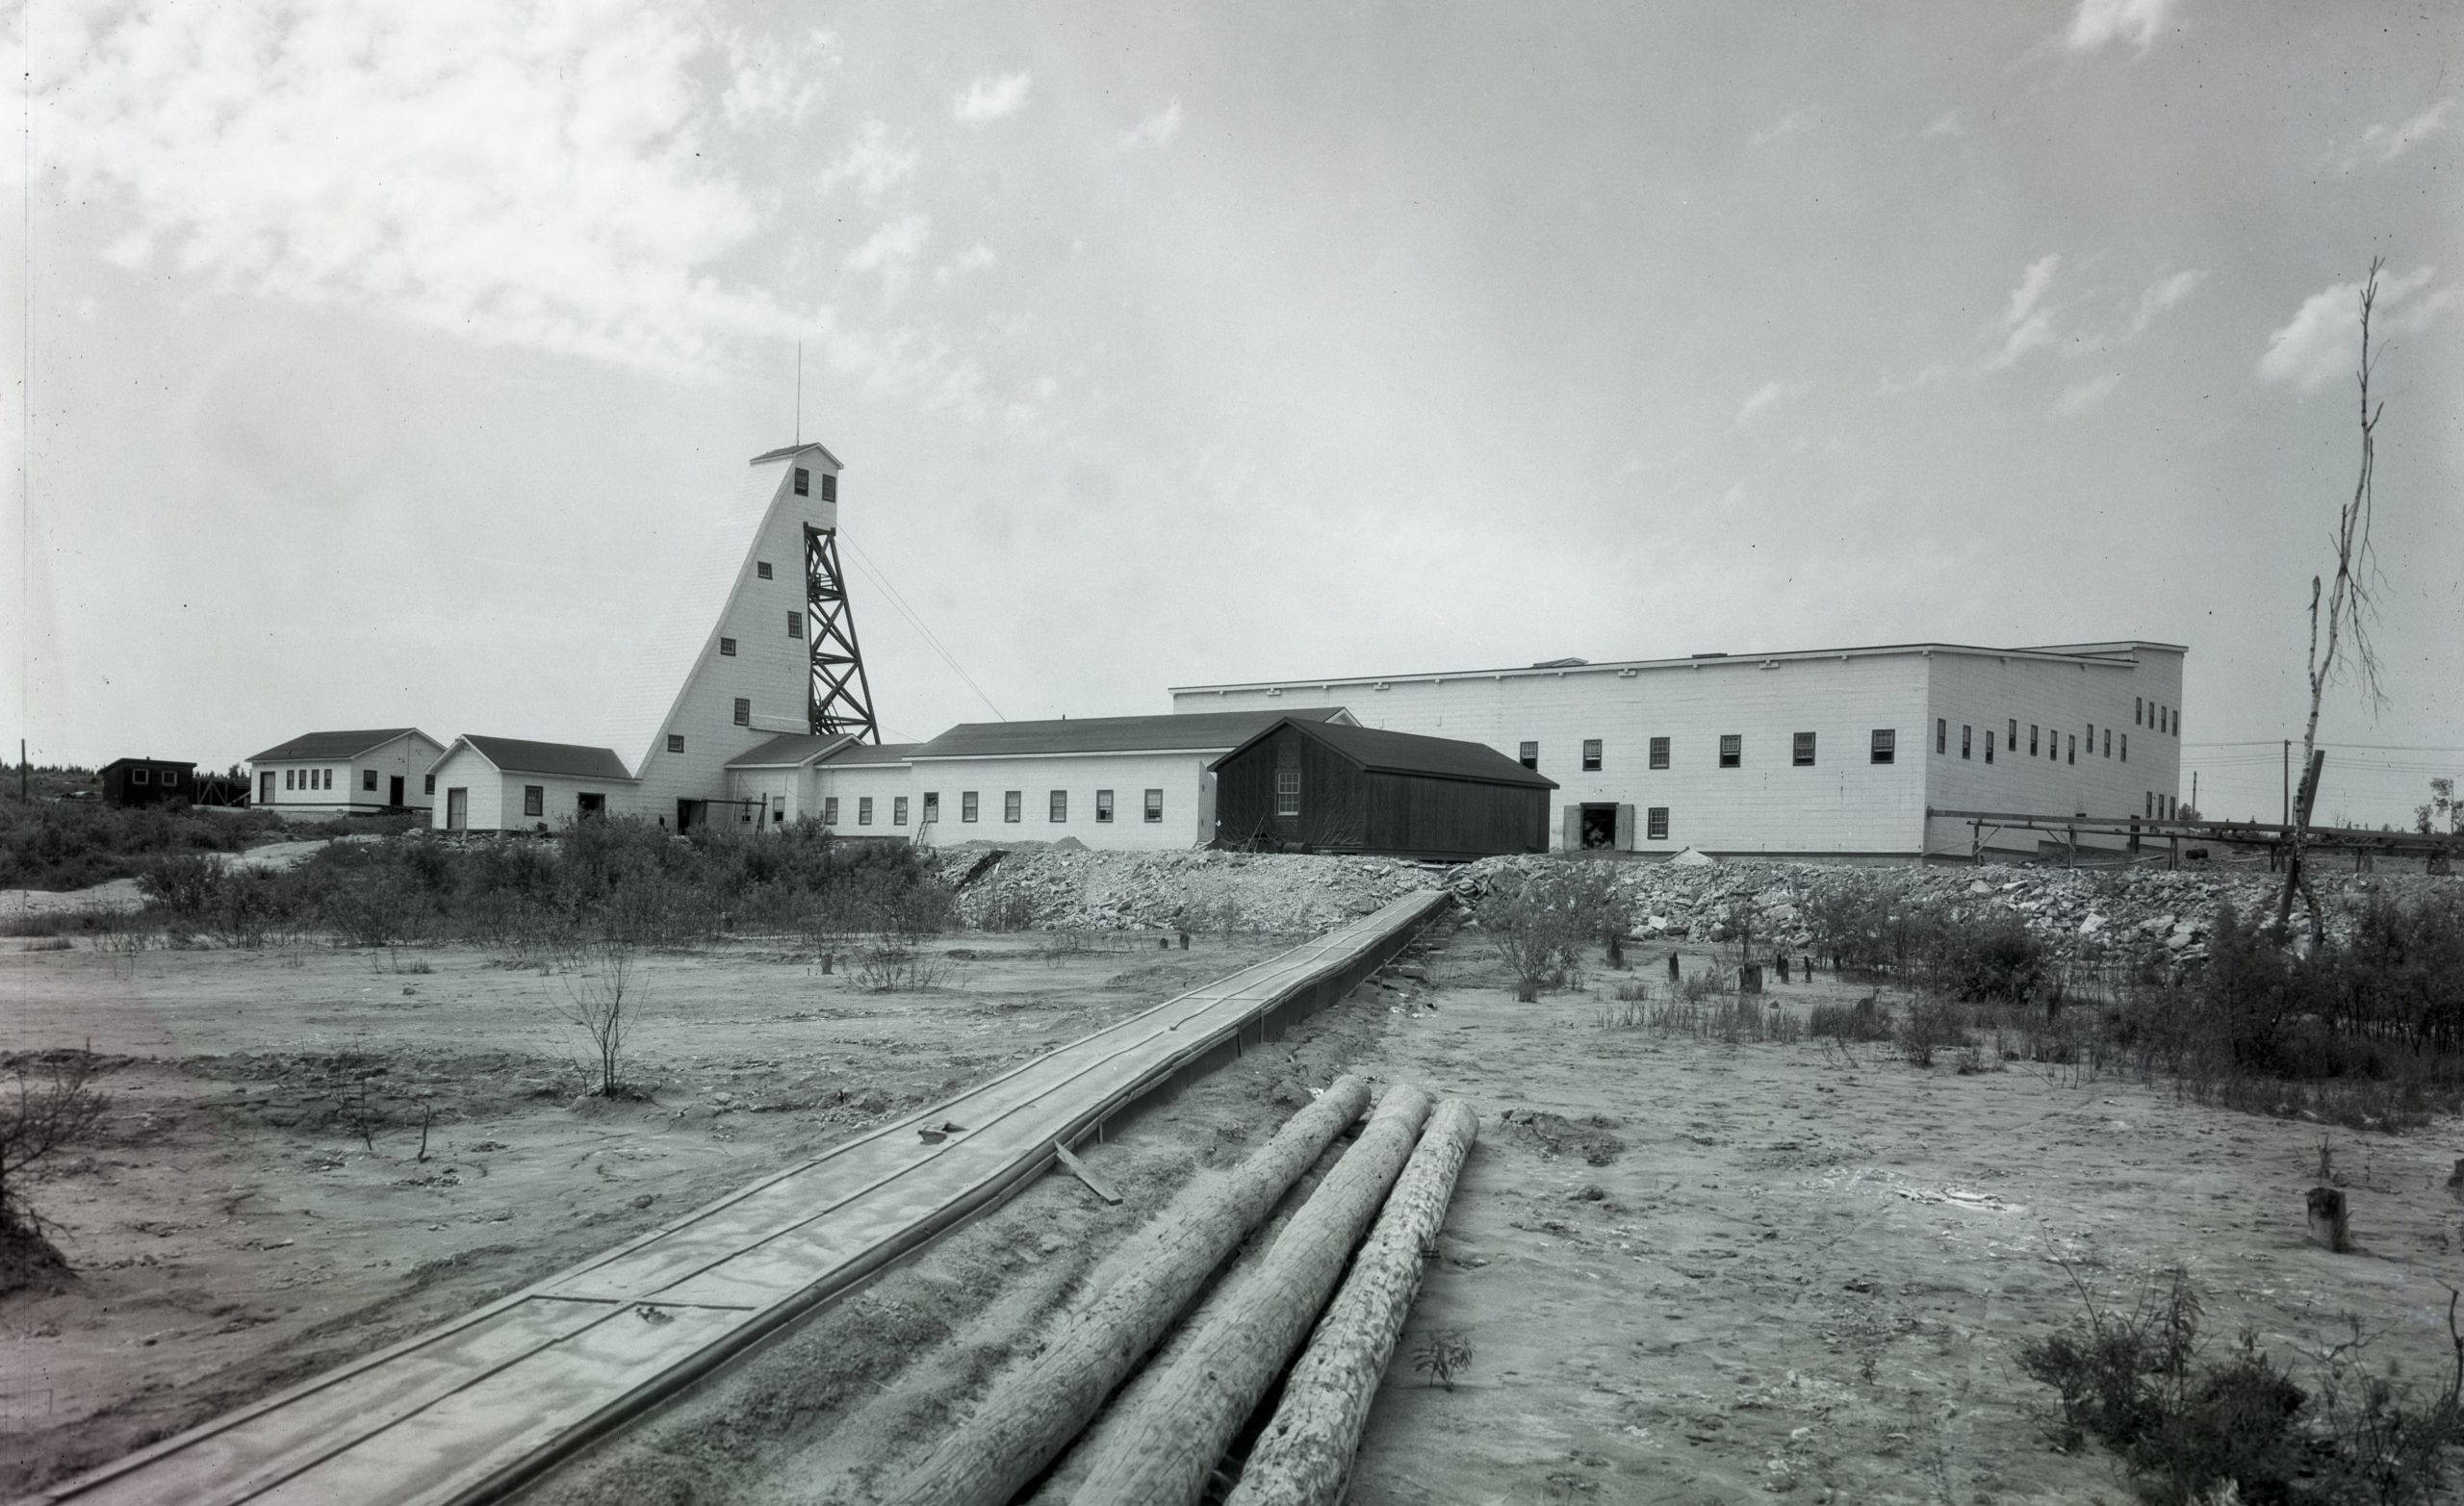 Black and white photograph of the infrastructures of Canadian Malartic Mines, including a headframe of planks. In the foreground, logs and a boardwalk provide access to the buildings.